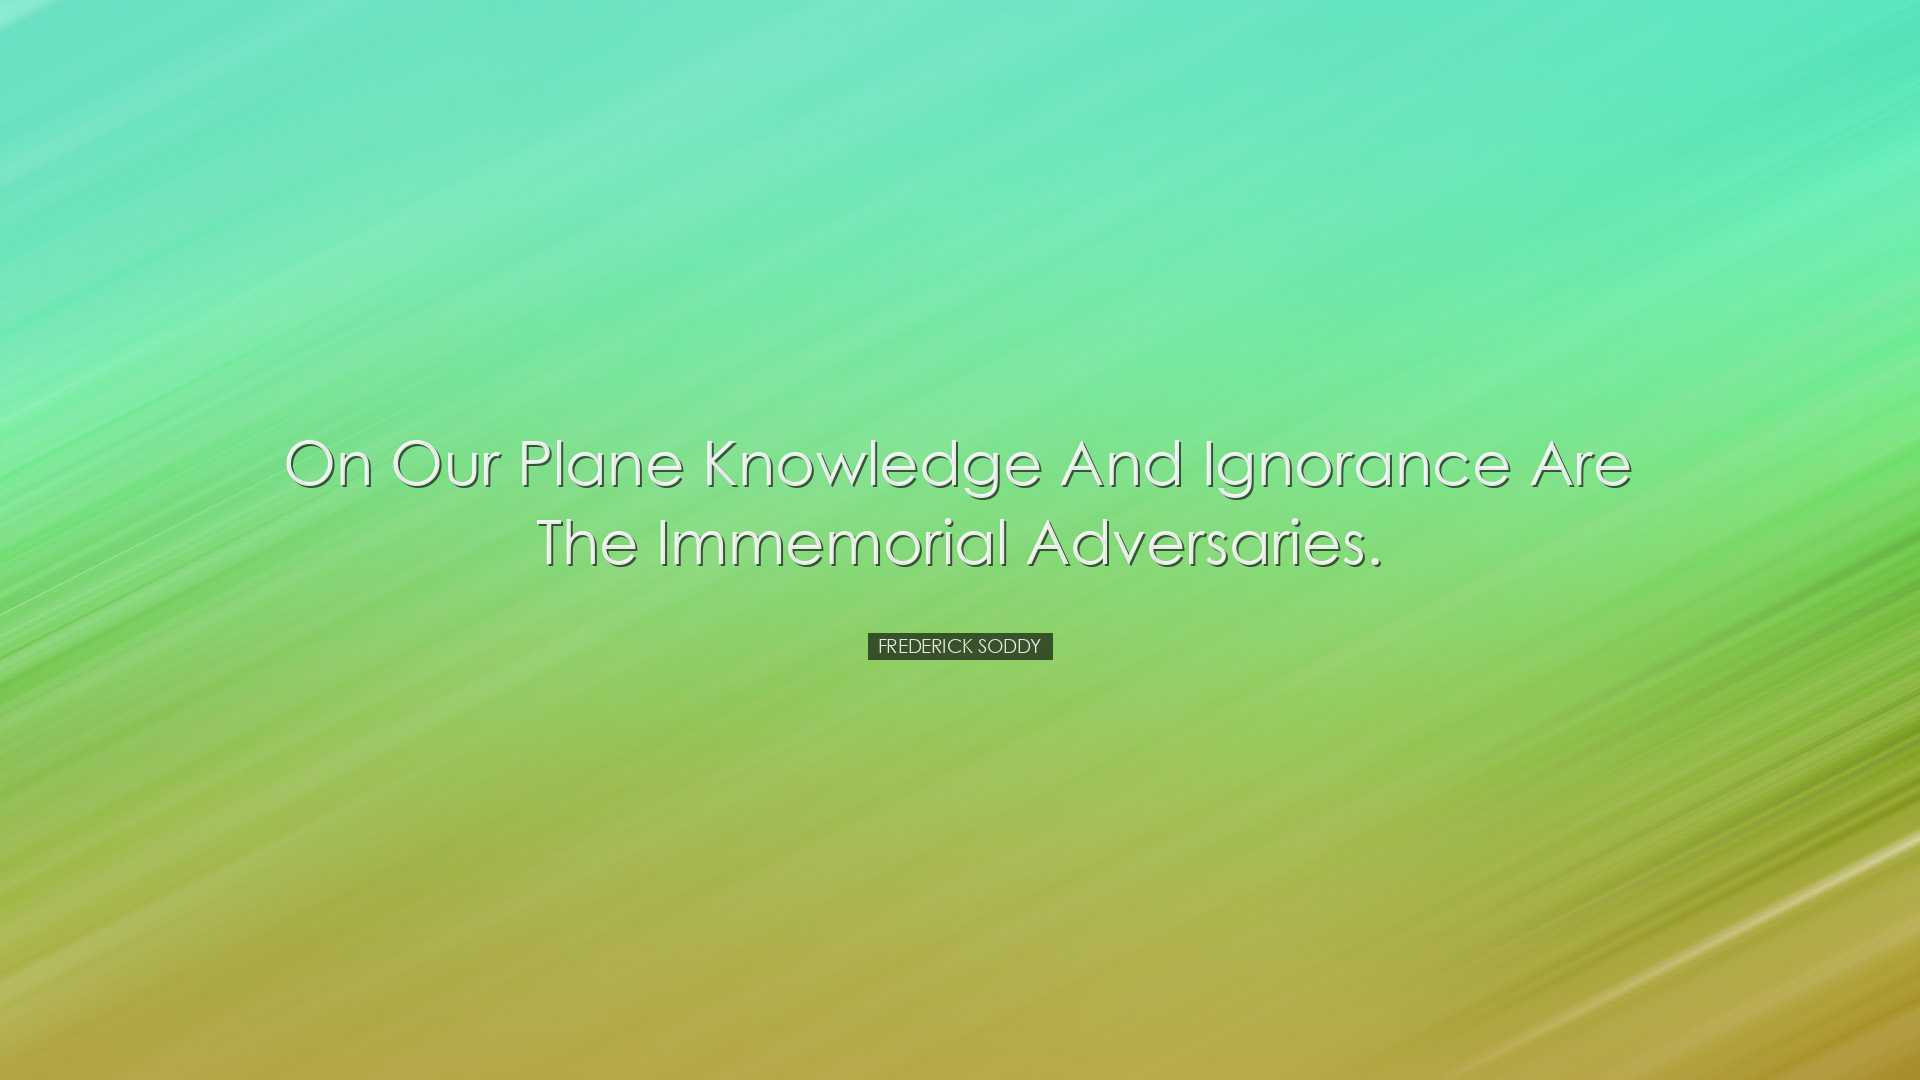 On our plane knowledge and ignorance are the immemorial adversarie